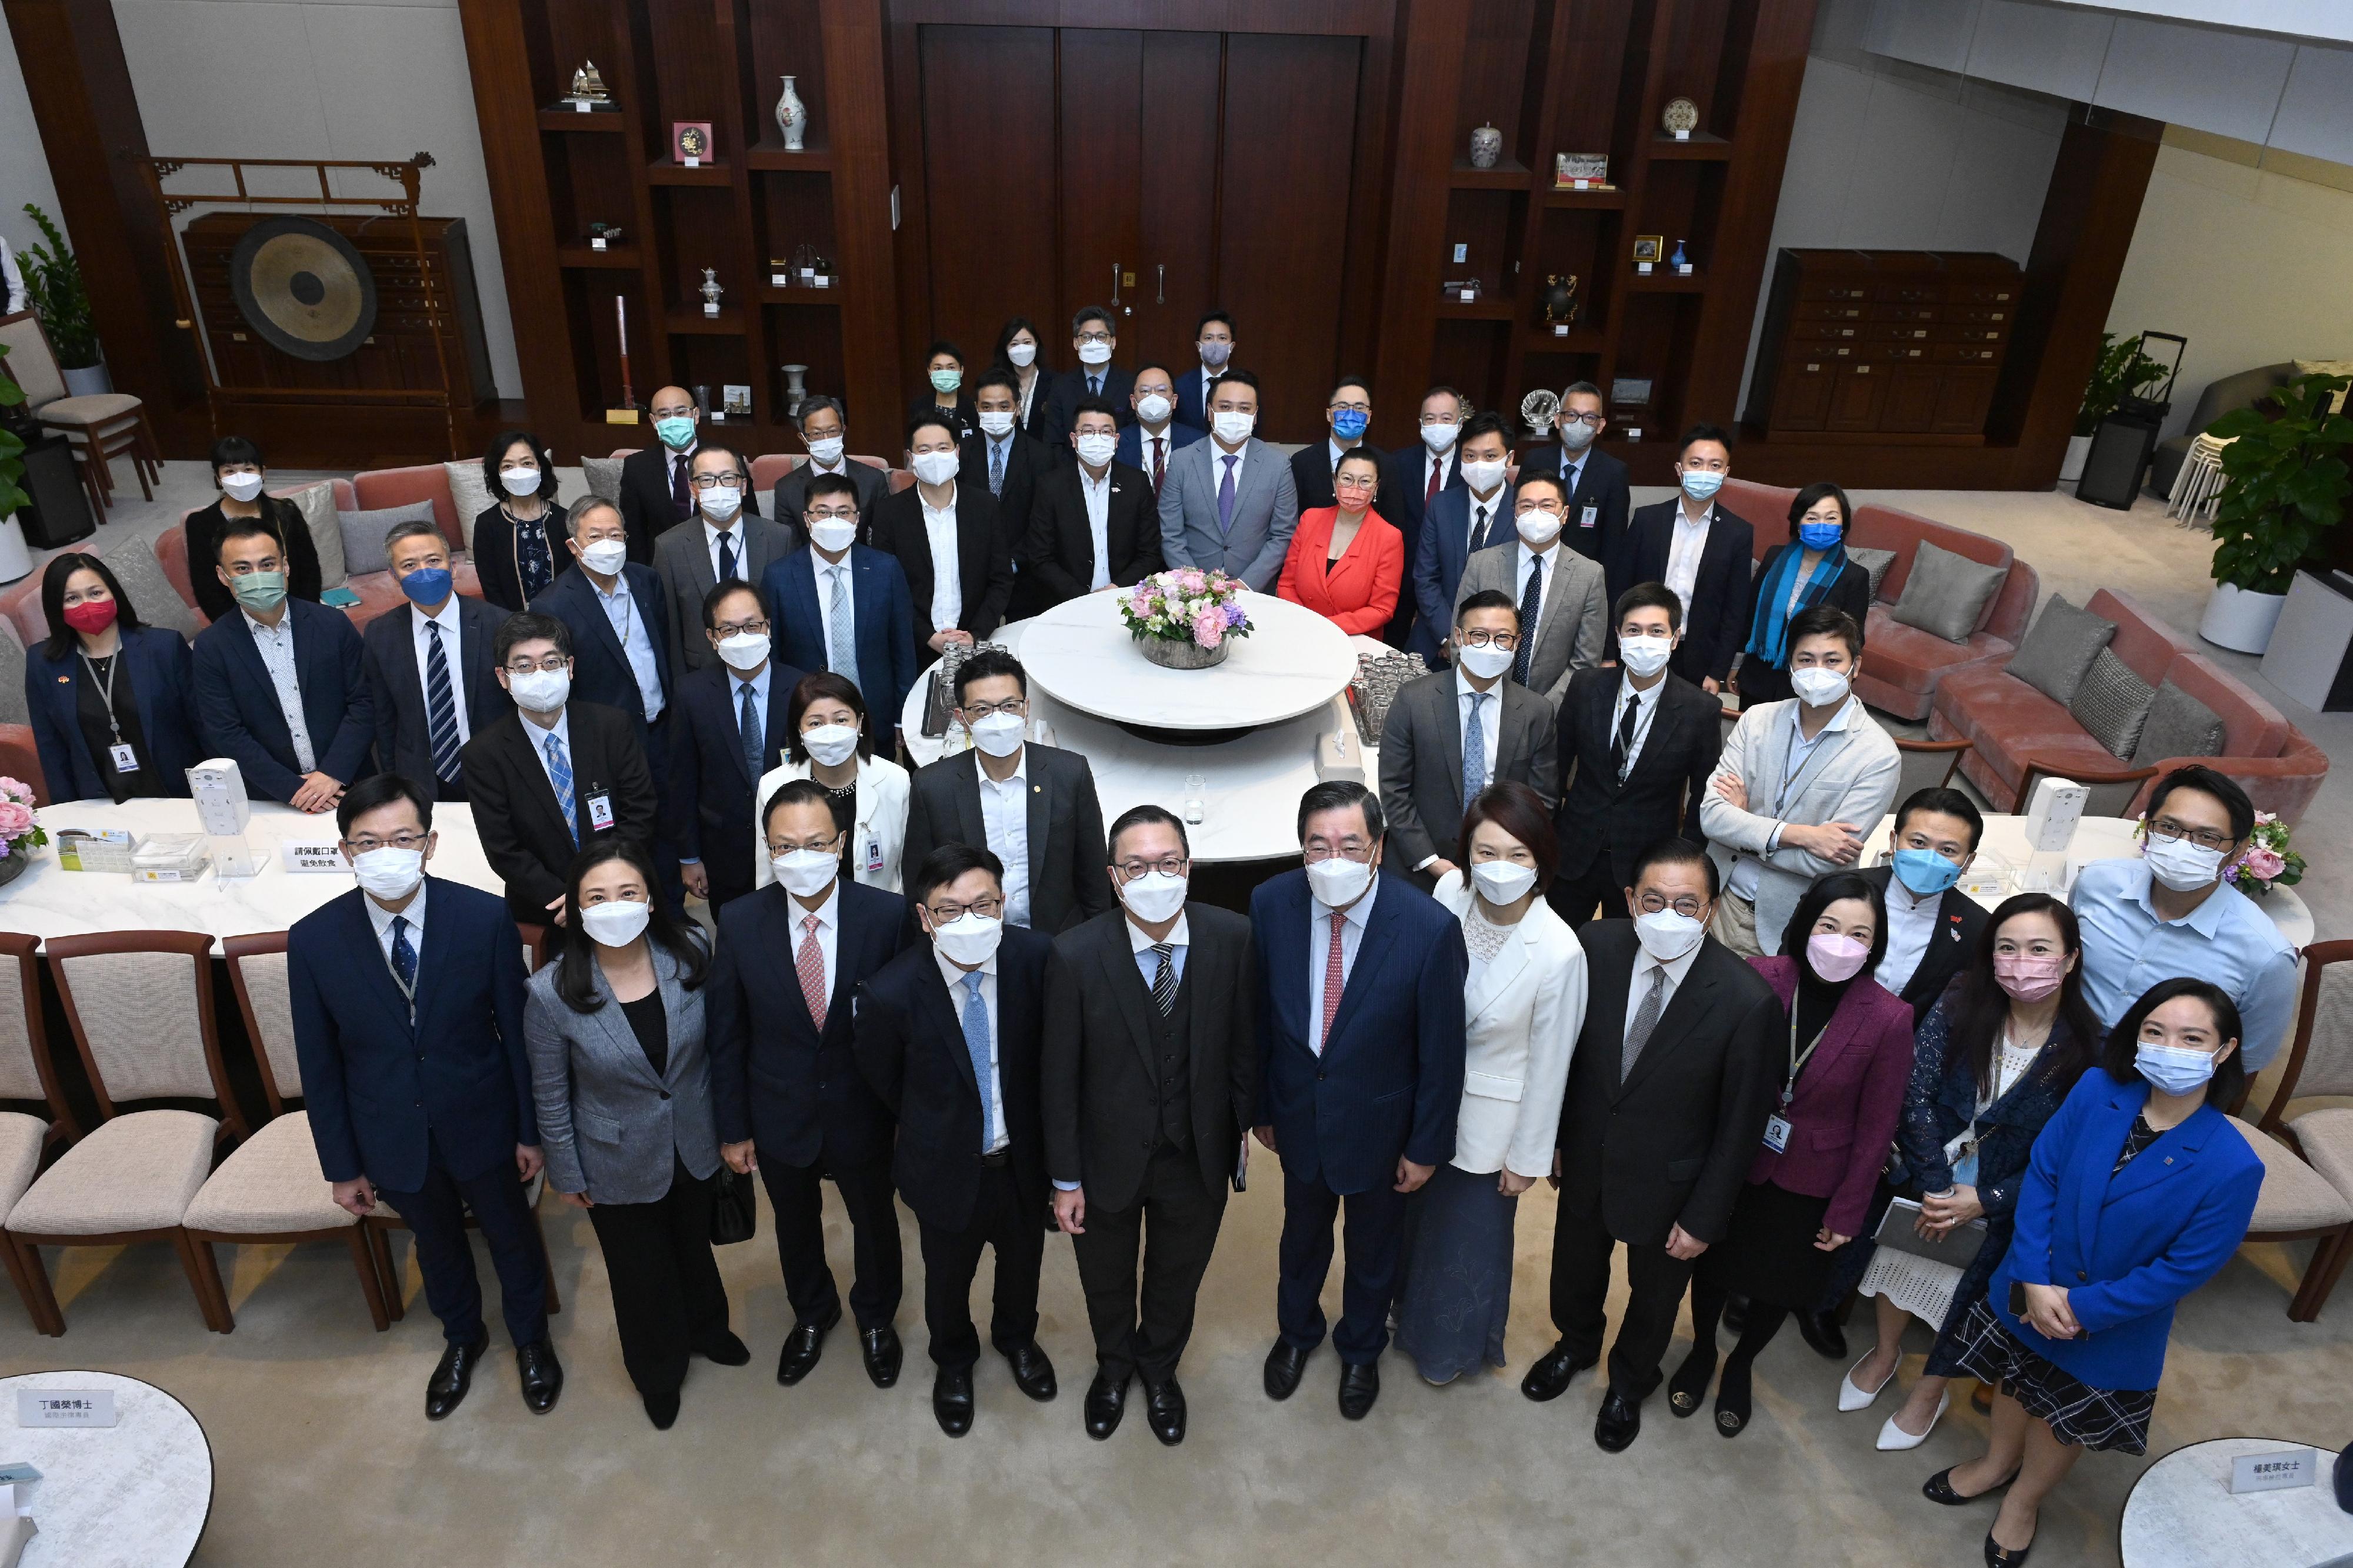 The Secretary for Justice, Mr Paul Lam, SC, attended the Ante Chamber exchange session at the Legislative Council (LegCo) today (November 23). Photo shows Mr Lam (first row, fifth left); the President of the LegCo, Mr Andrew Leung (first row, sixth left); the Deputy Secretary for Justice, Mr Cheung Kwok-kwan (second row, third right); and LegCo Members before the meeting.